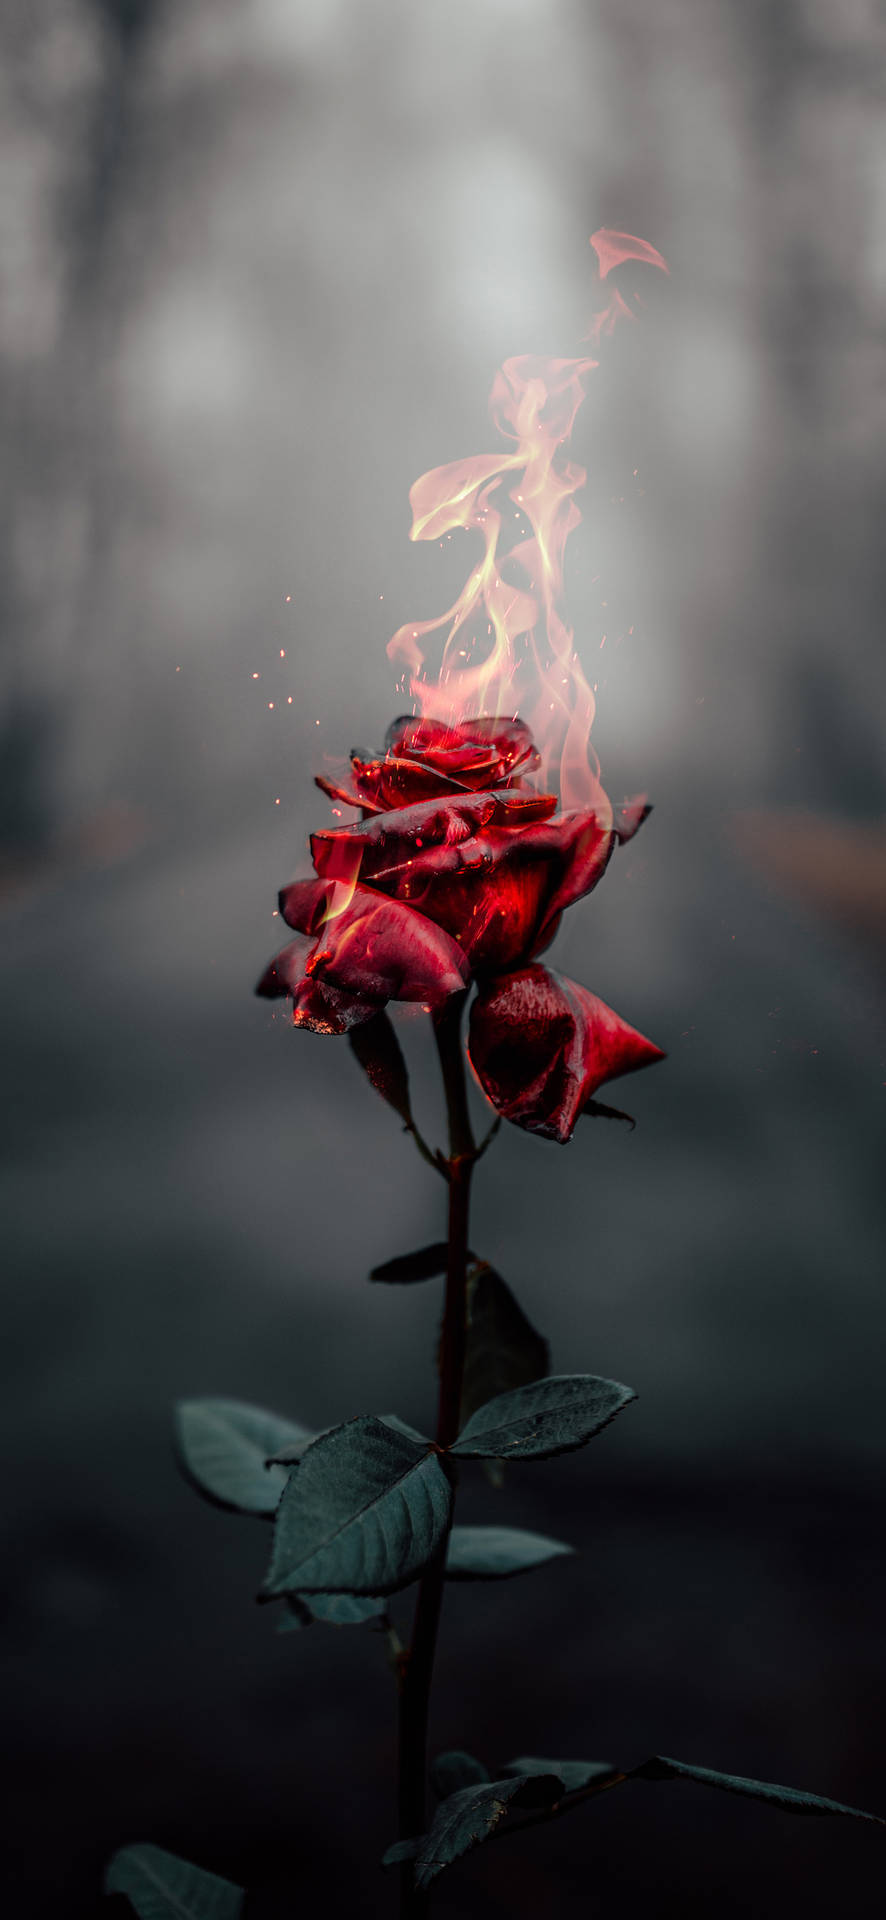 Iphone Aesthetic Flaming Rose Picture